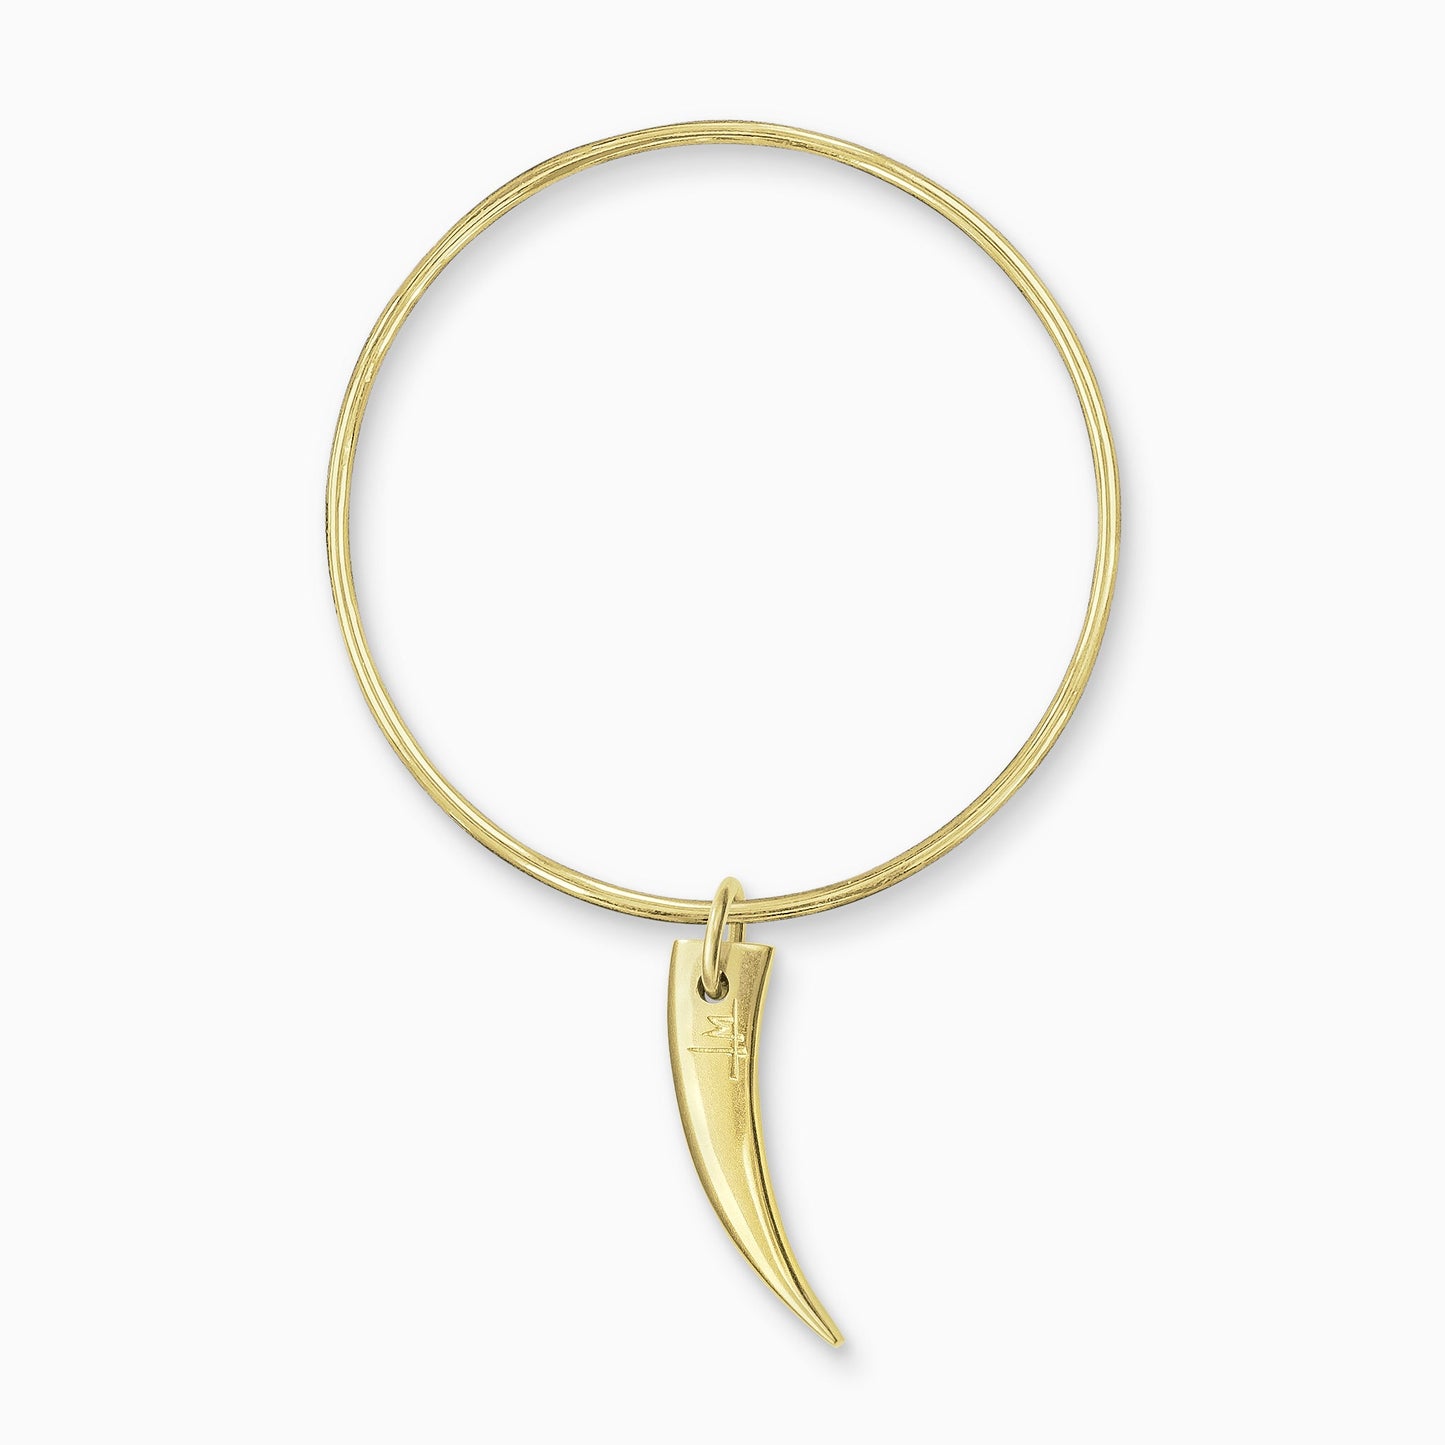 An 18ct Fairtrade yellow gold smooth, tusk shaped charm, freely moving on a round wire bangle.  Charm 63mm. Bangle 63mm inside diameter x 2mm round wire.